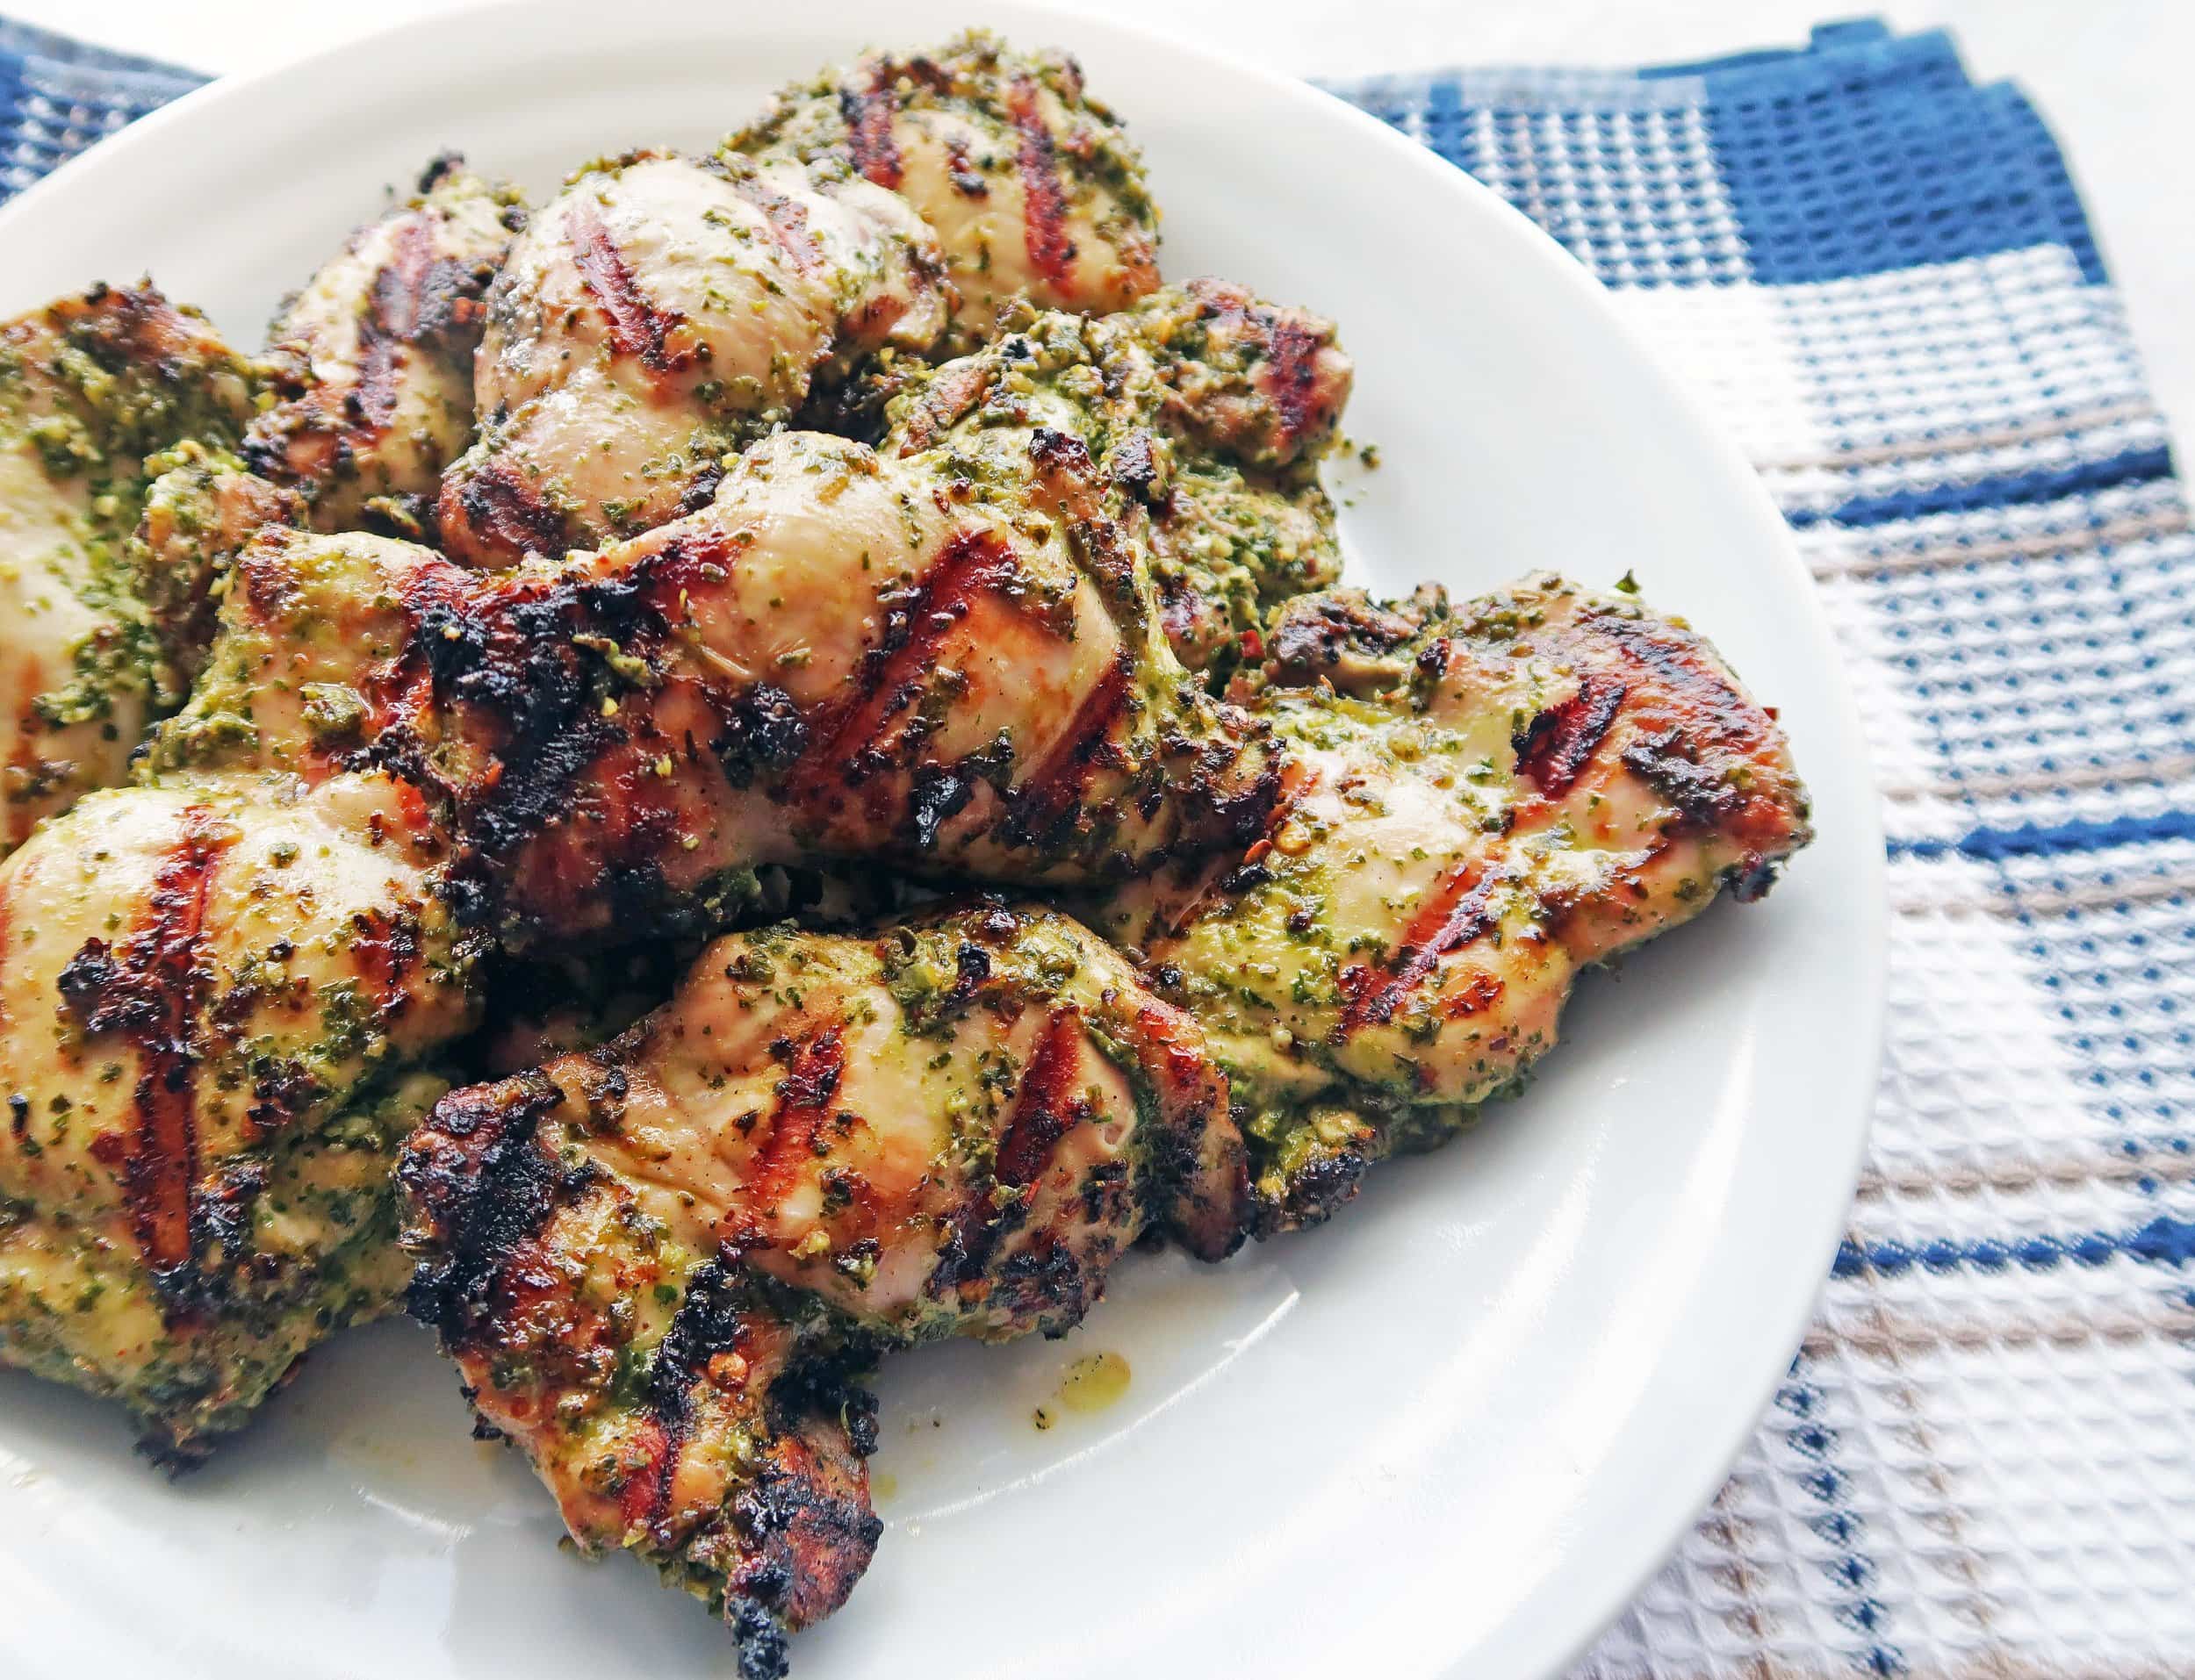 Side angled view of a white plate Grilled Chicken Thighs with Chimichurri Sauce on top of a blue checkered towel.